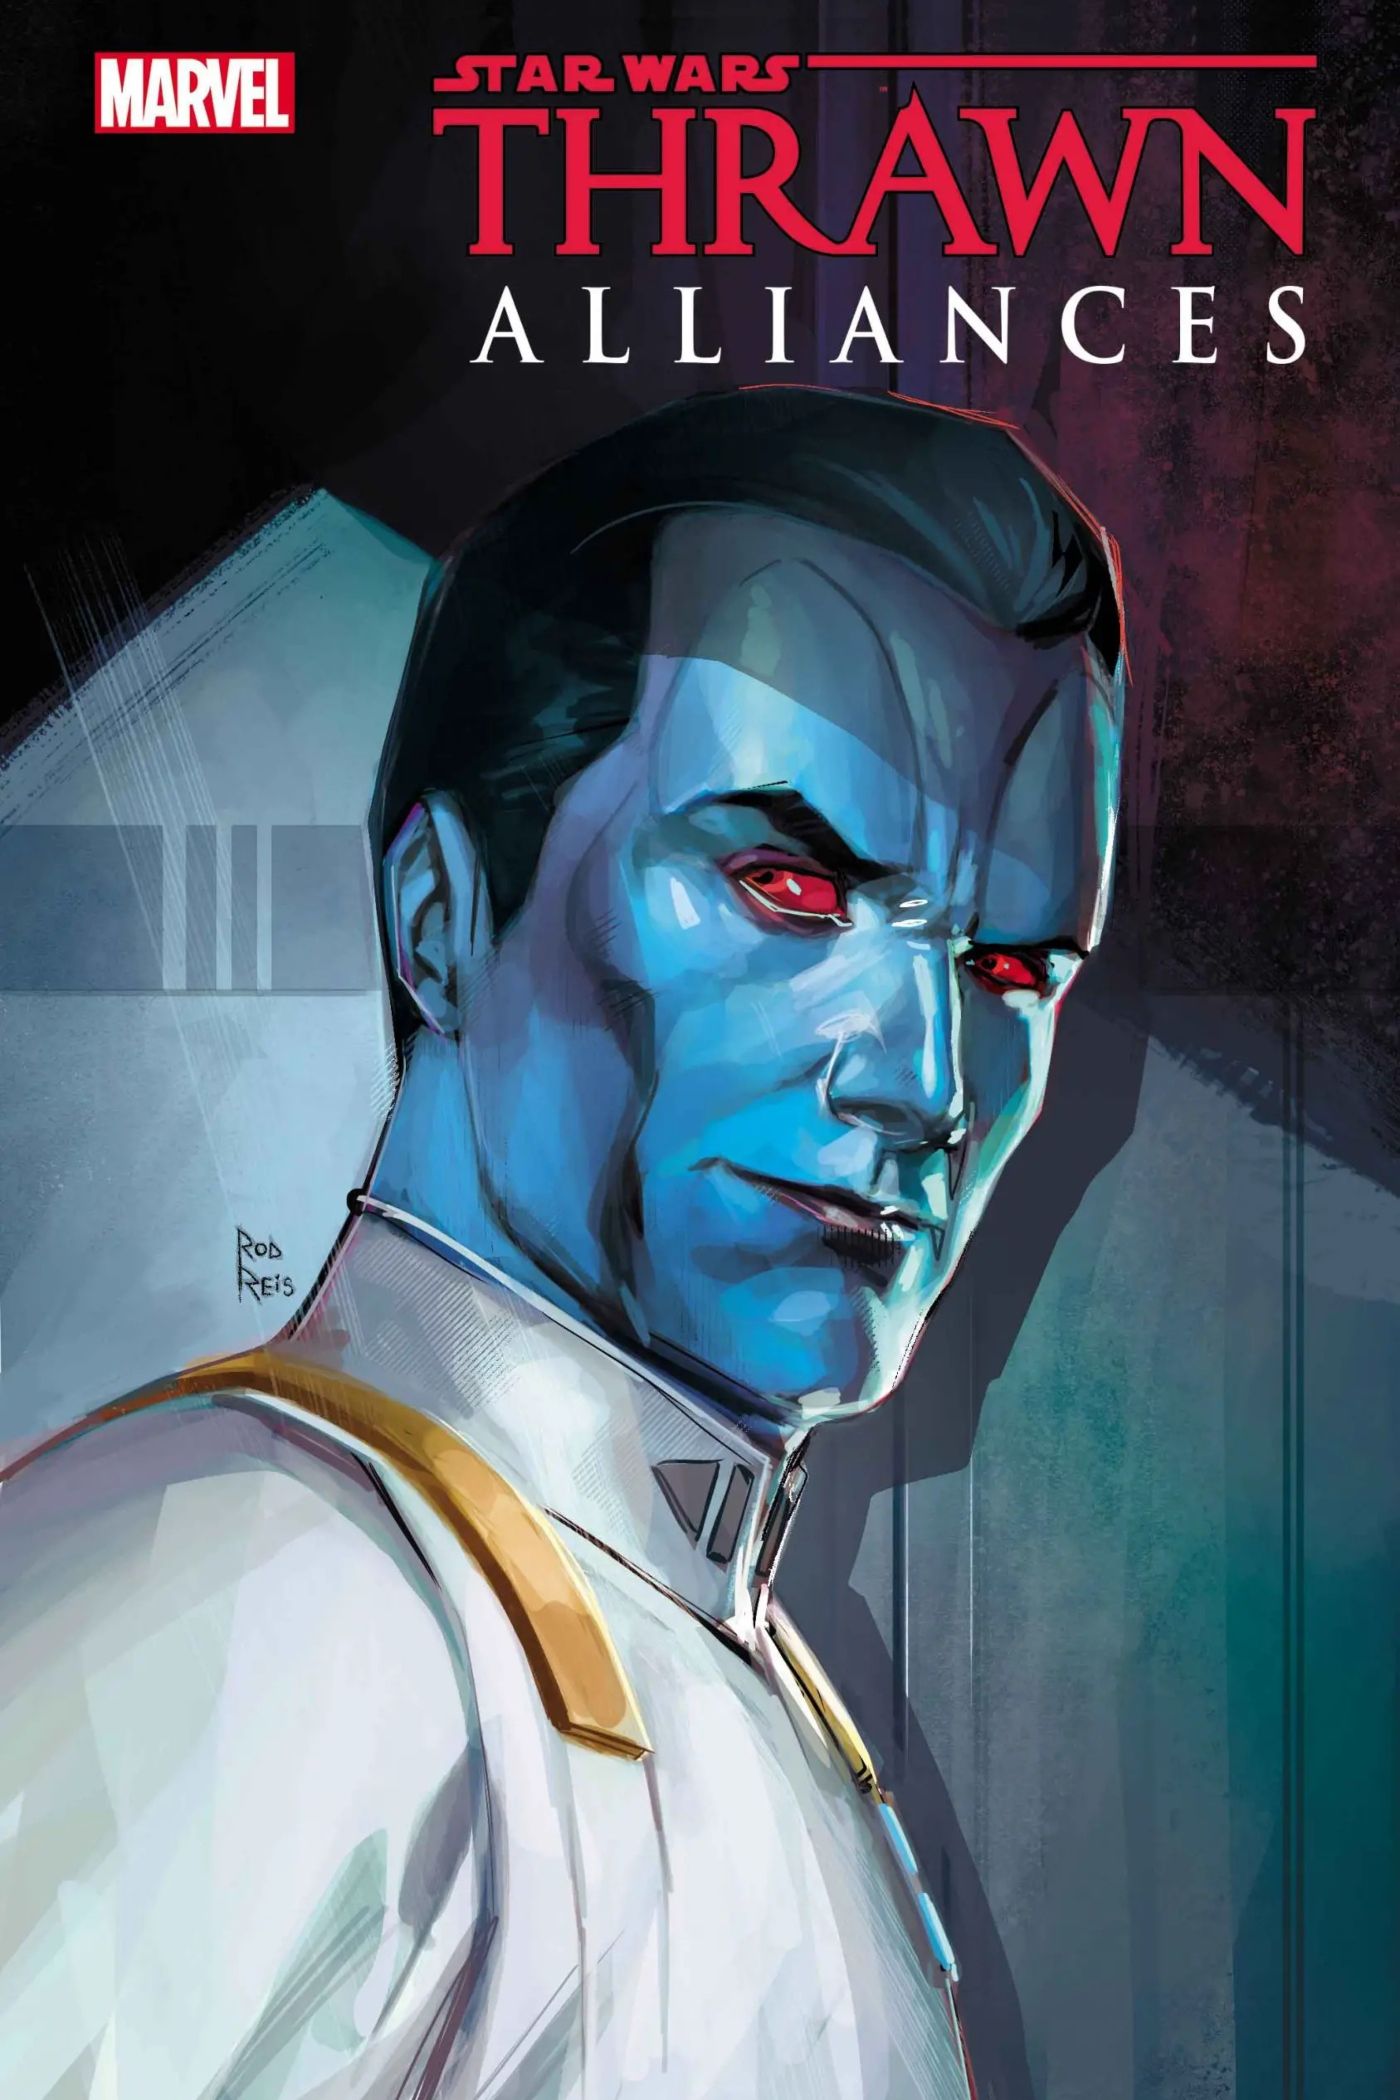 Thrawn’s Secret History with Anakin Skywalker Exposed in First Look at New Series